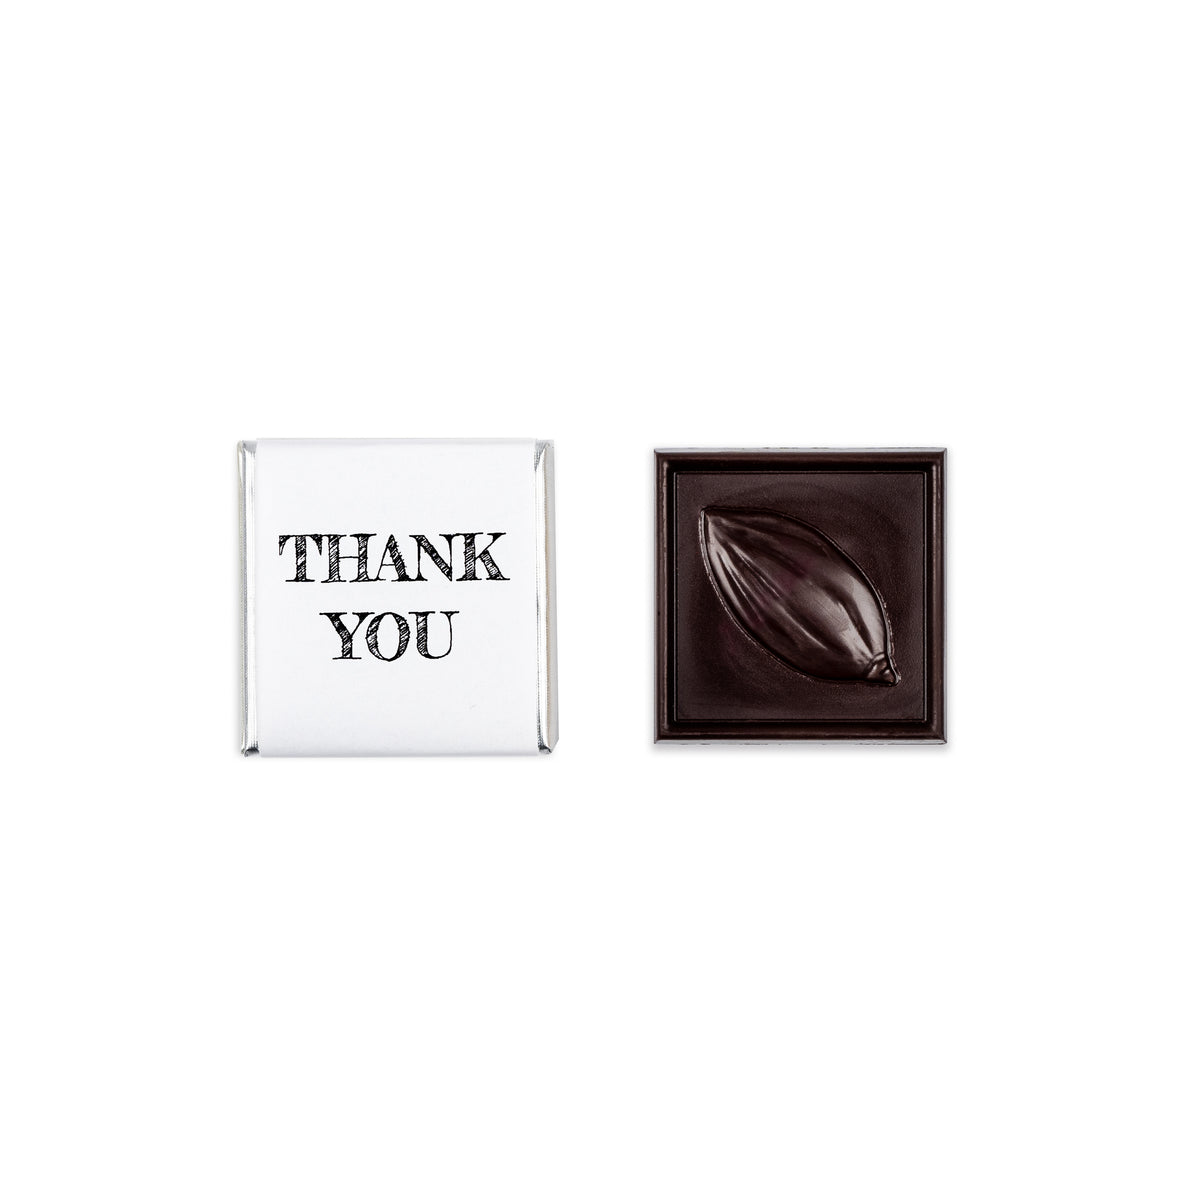 100 chocolate &quot;Thank You&quot; squares - 0.50$ each